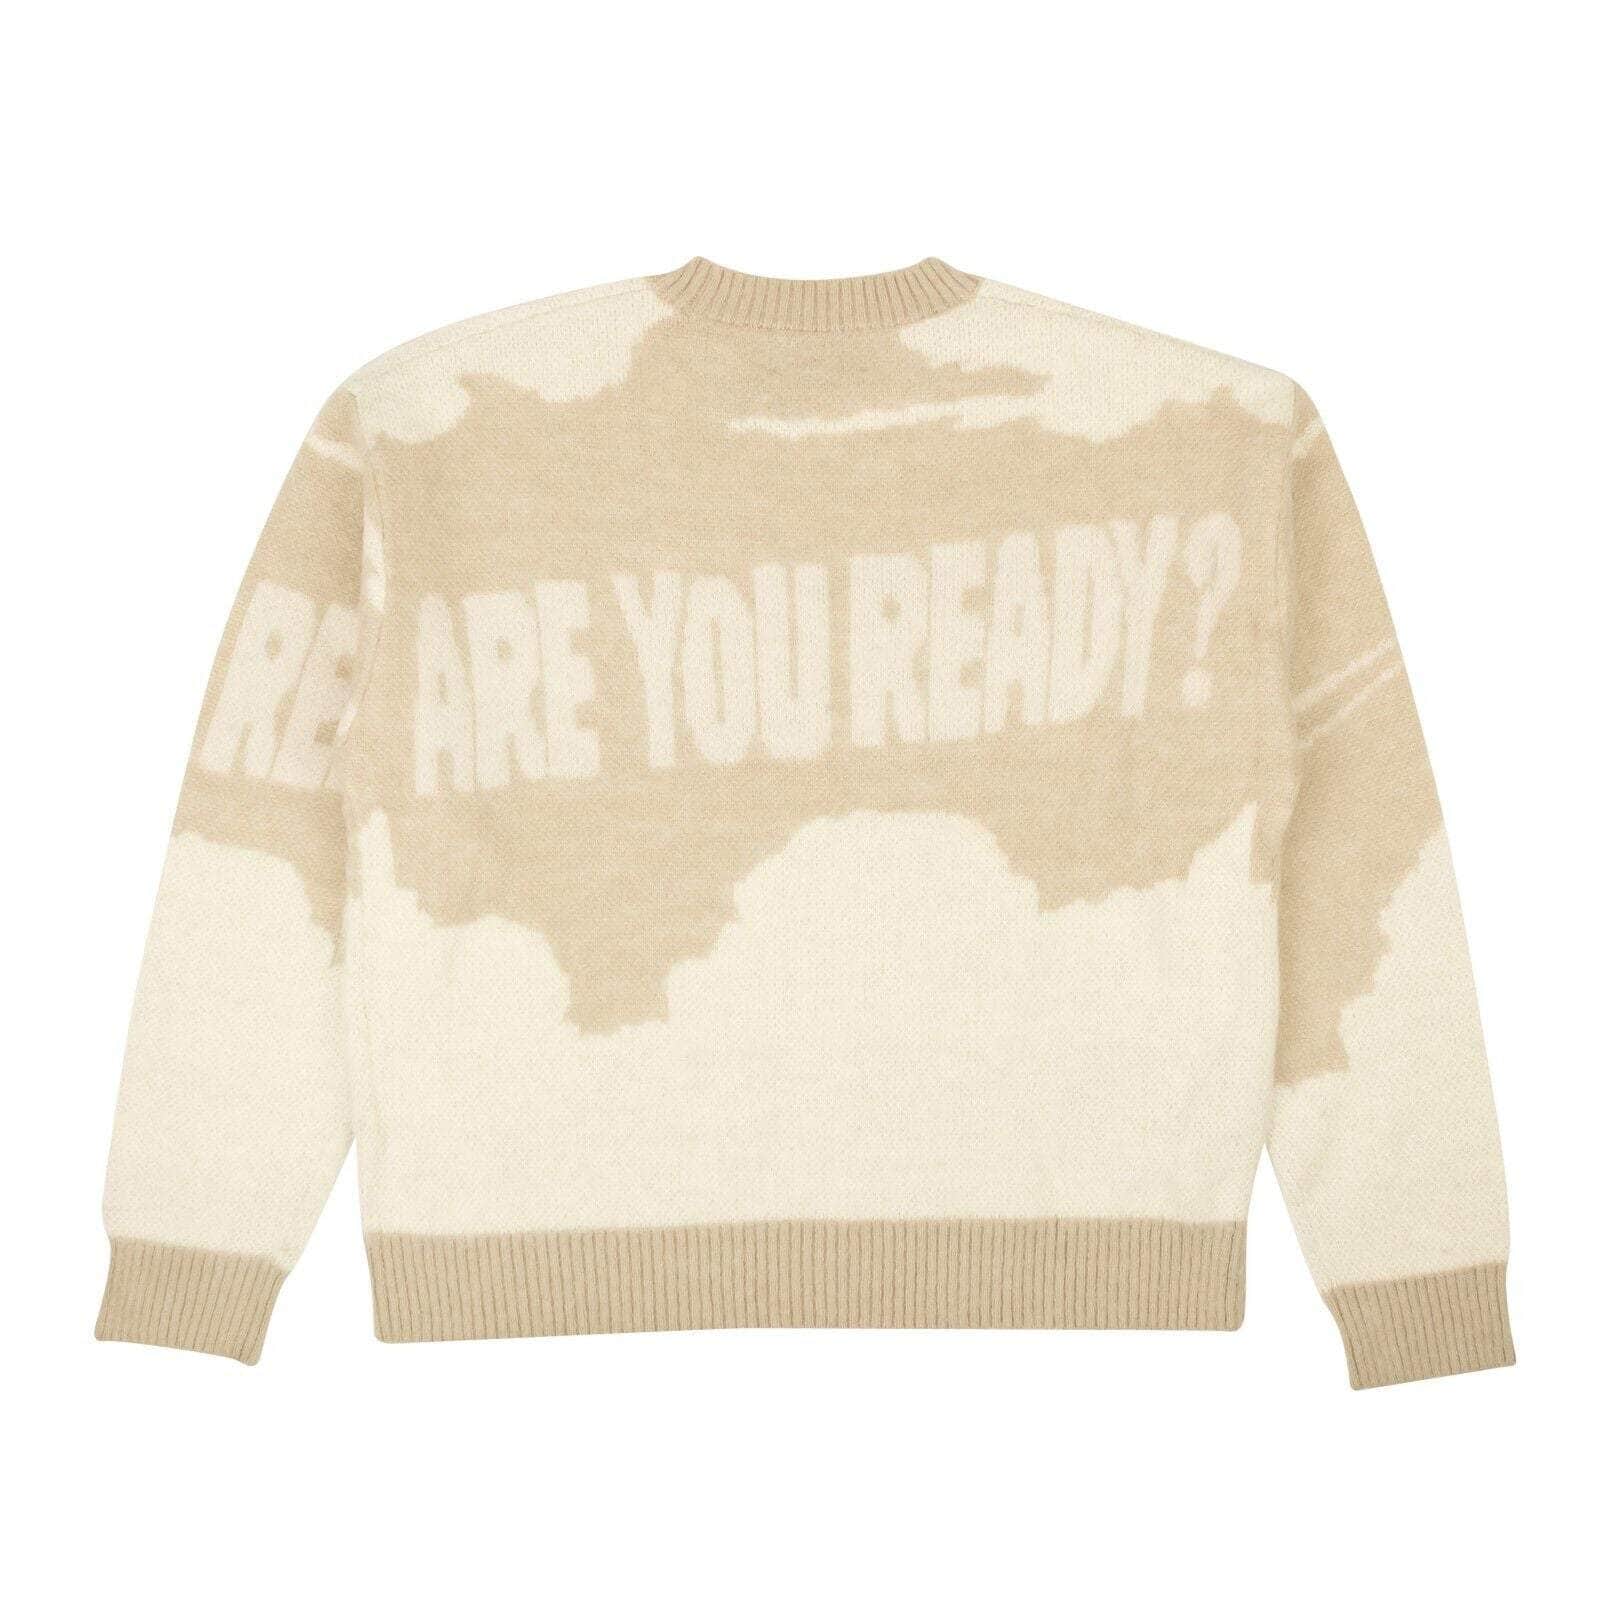 Who Decides War 250-500, channelenable-all, chicmi, couponcollection, gender-mens, main-clothing, mens-crewnecks, mens-shoes, size-l, size-xl, who-decides-war Beige Are You Ready Crewneck Sweater